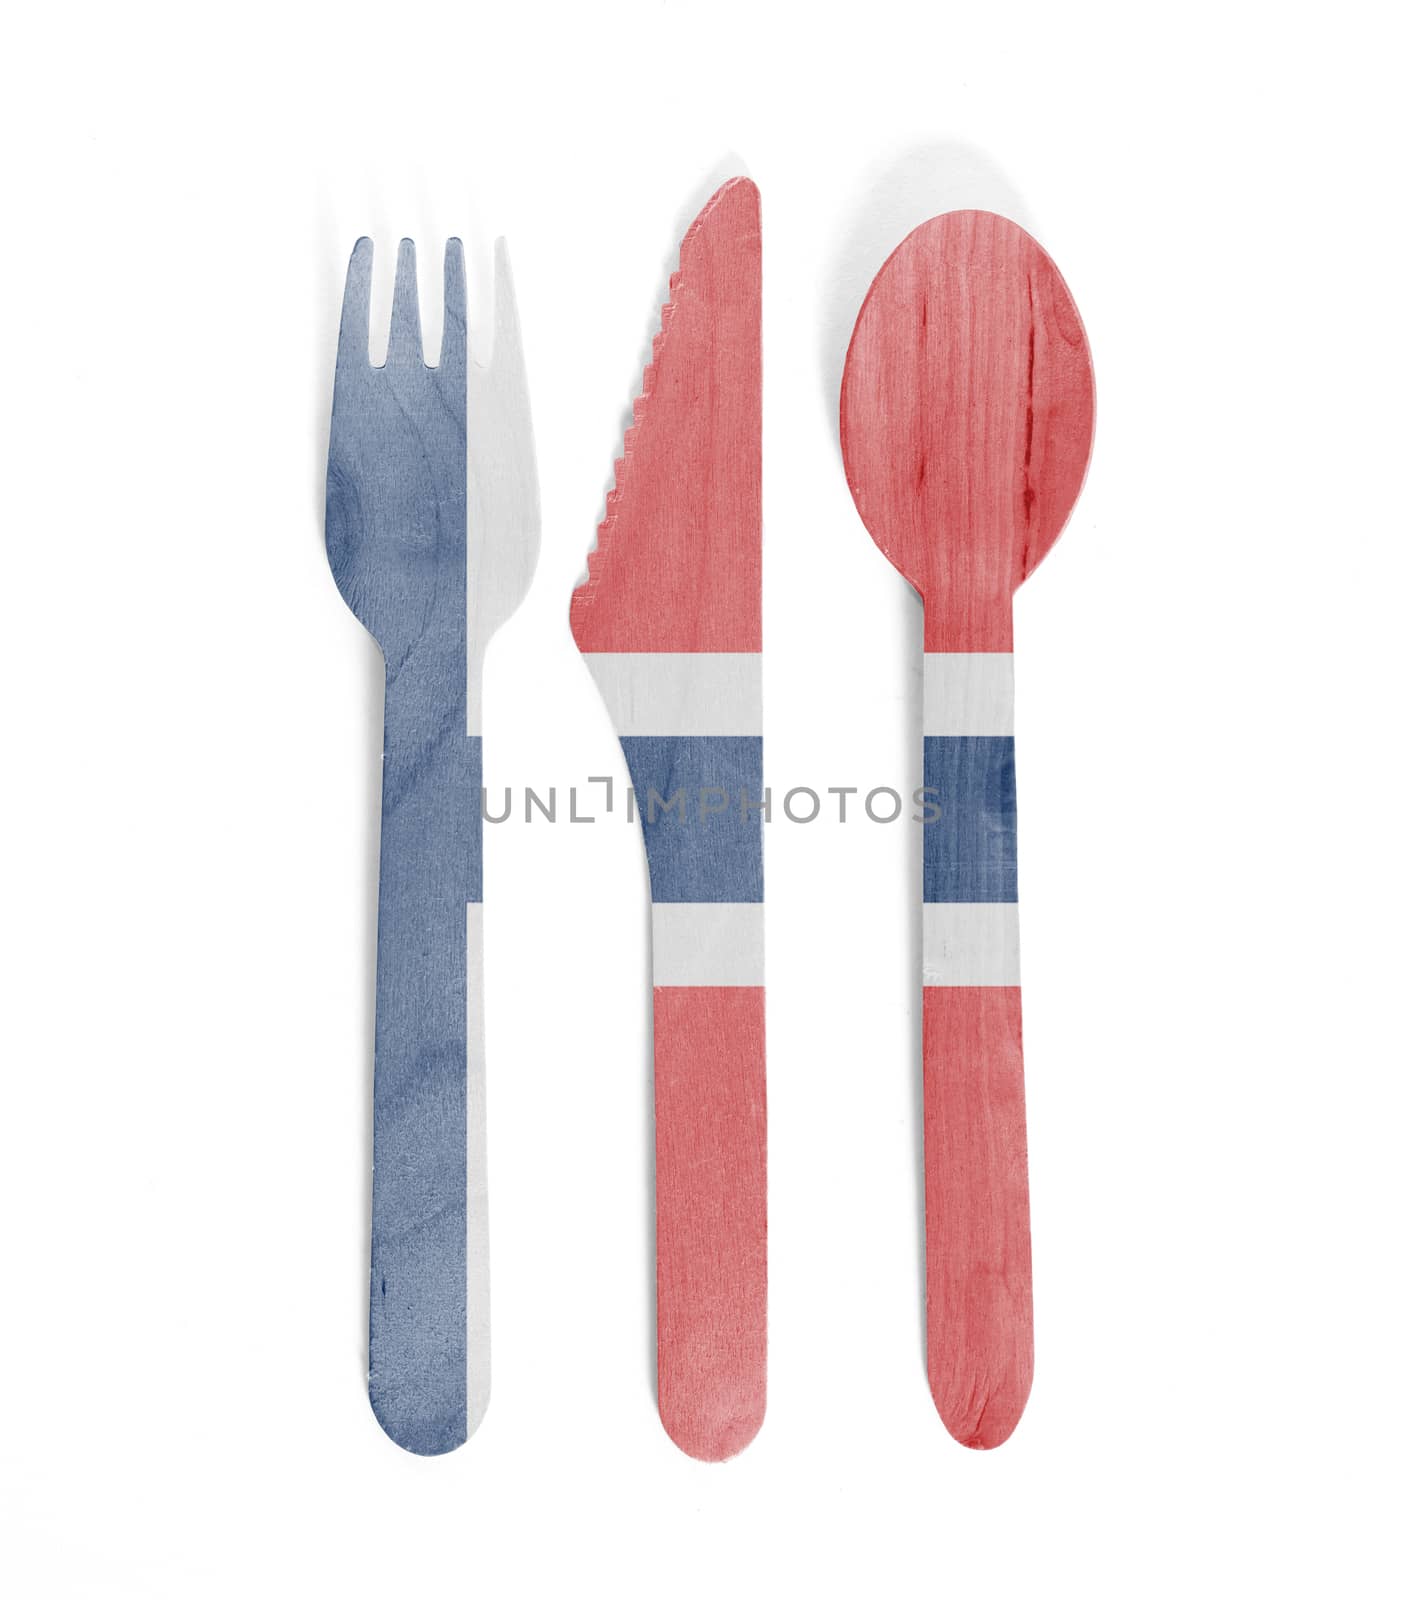 Eco friendly wooden cutlery - Plastic free concept - Flag of Nor by michaklootwijk